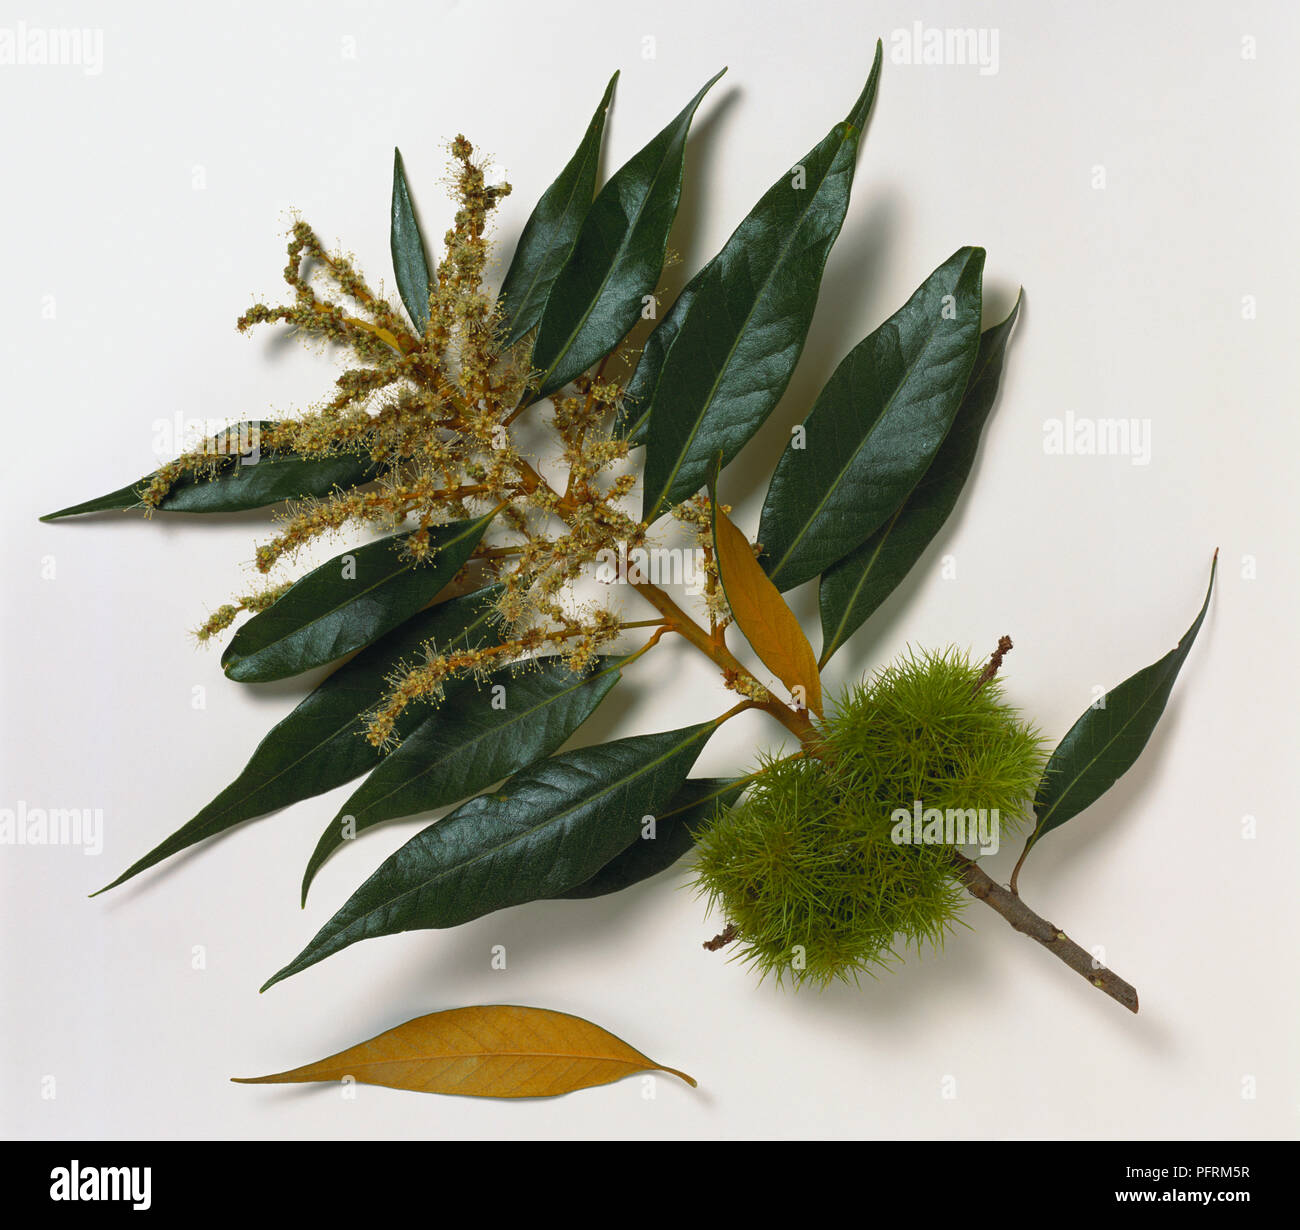 Chrysolepis chrysophylla (Golden chinkapin, Golden chinquapin), stem with leaves and husks Stock Photo